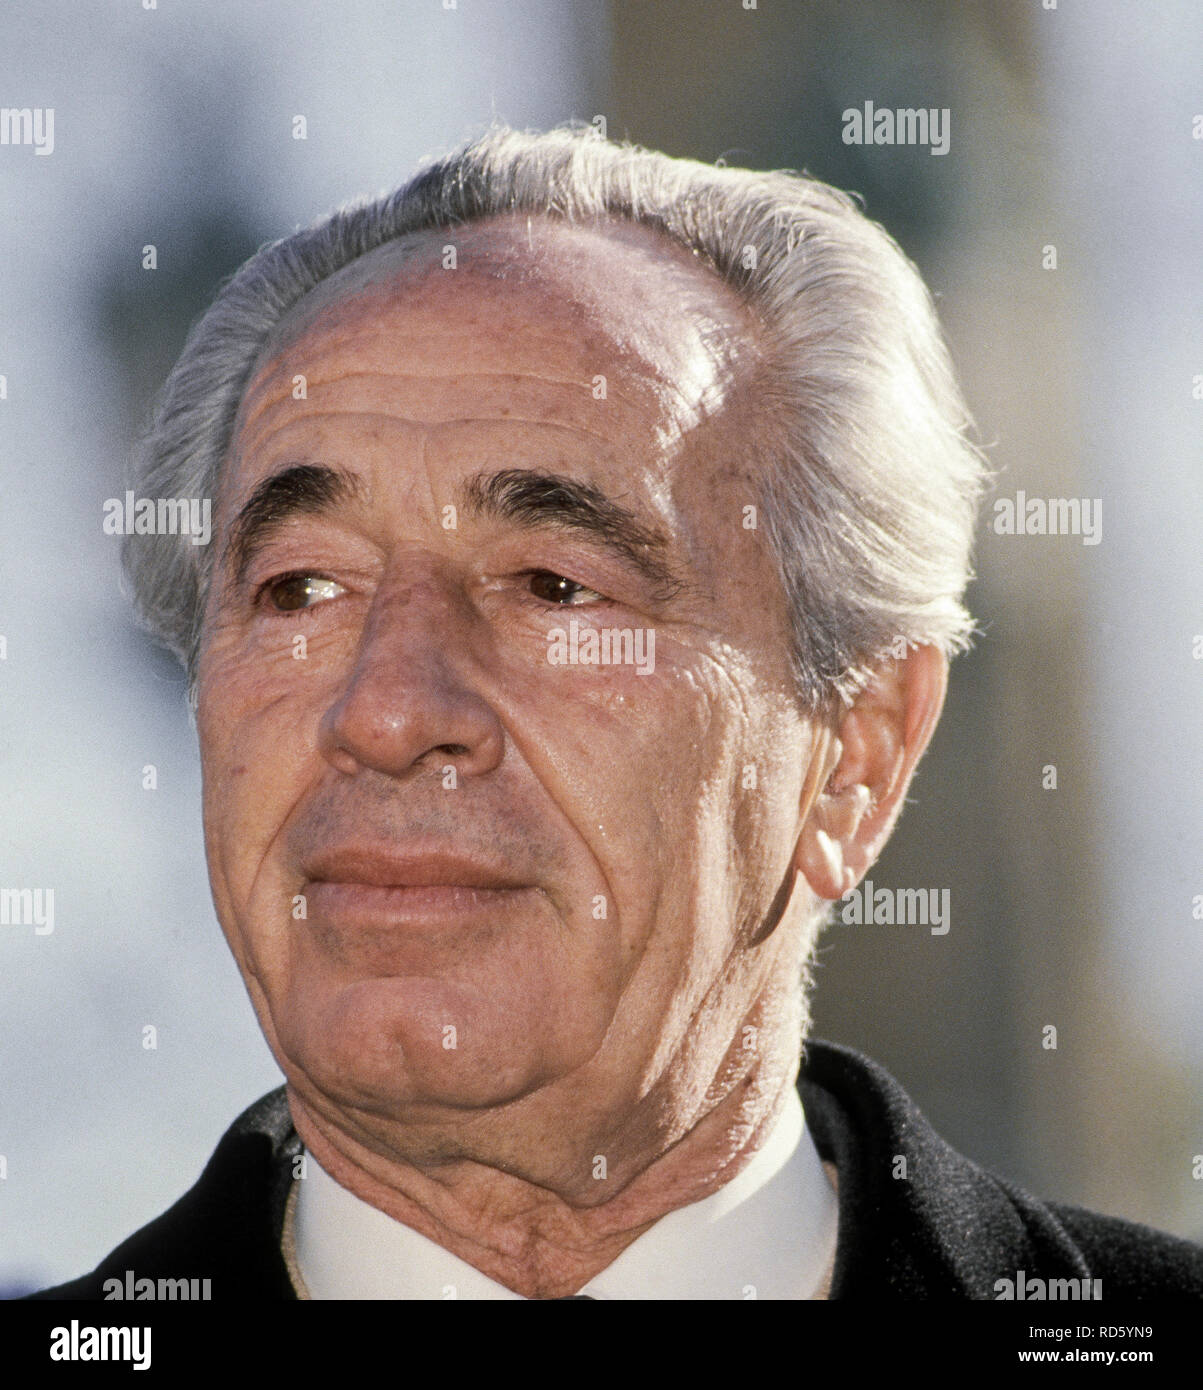 Chicago, Illinois, USA, October 16, 1985  Prime Minister of Israel Shimon Peres during visit to Chicago. Credit: Mark Reinstein/MediaPunch Stock Photo